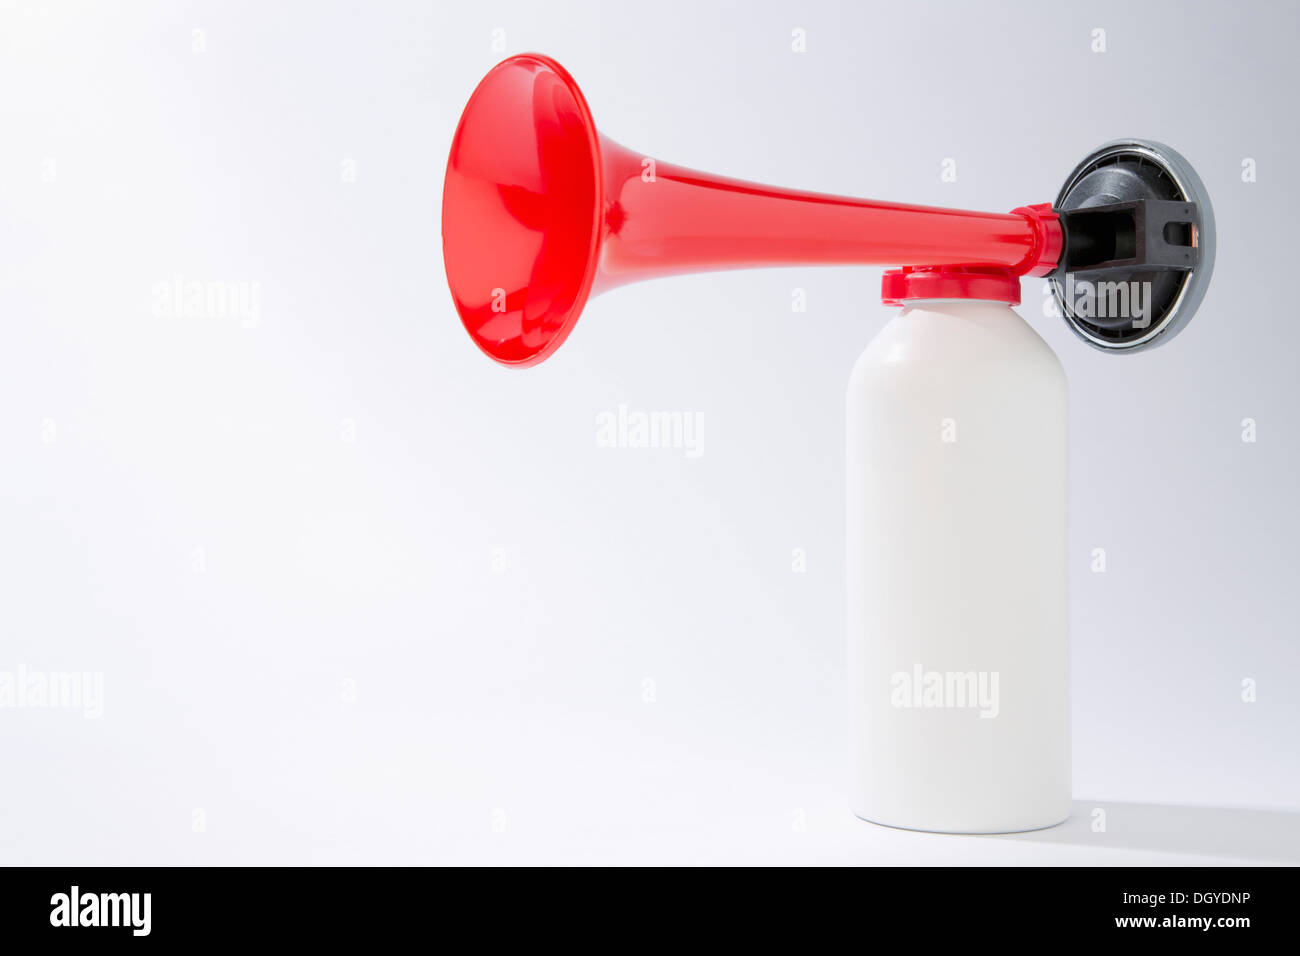 An air horn used for cheering at sporting events Stock Photo